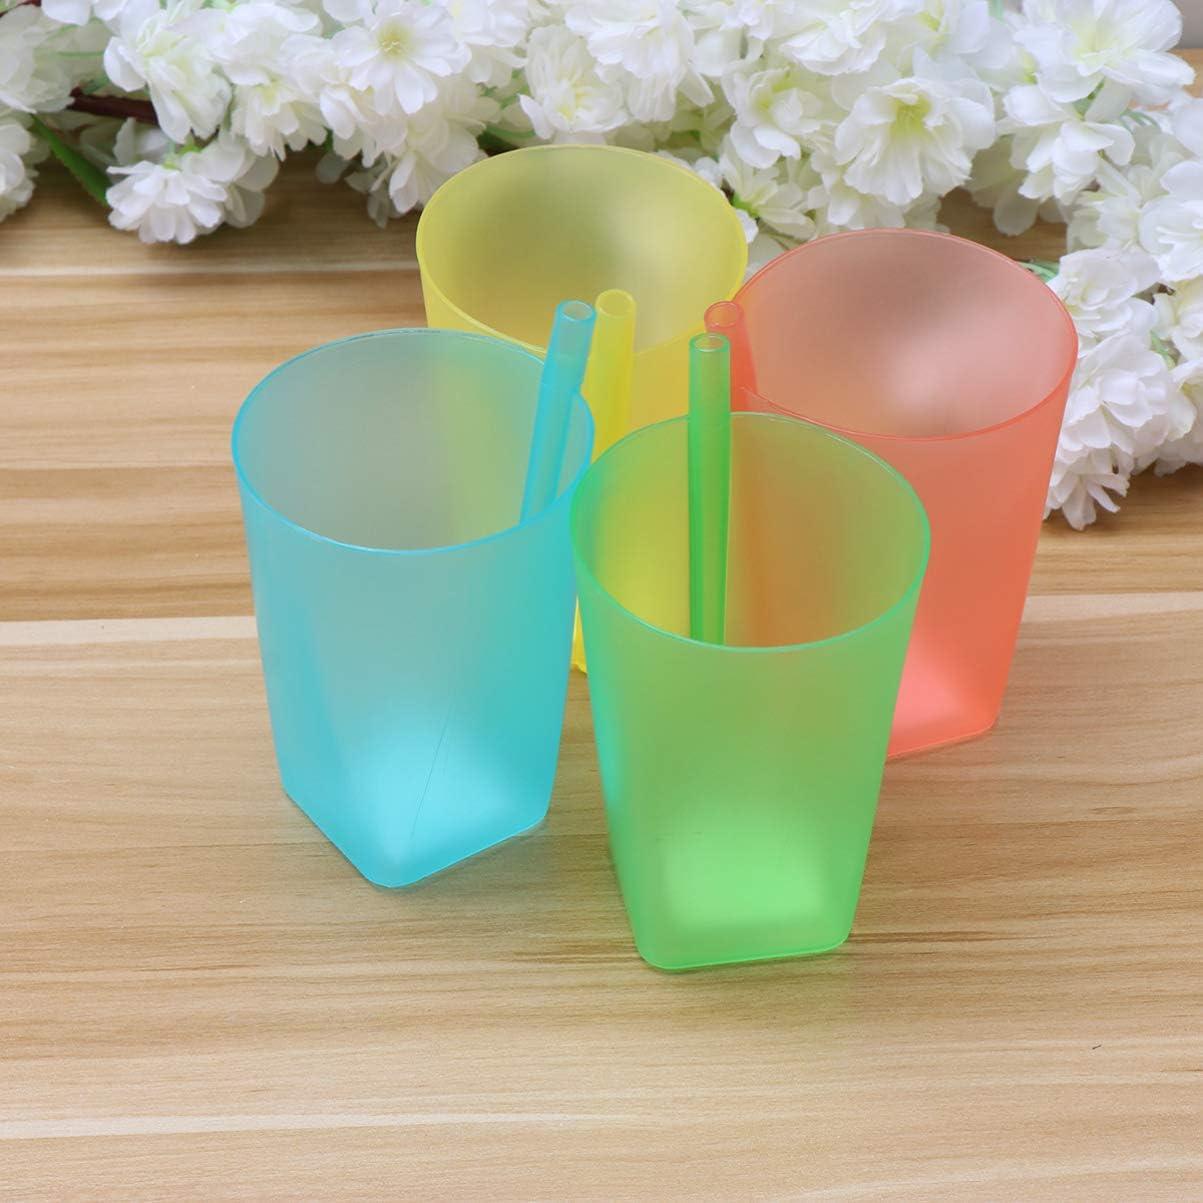 EXCEART Sippy Cup 4PC Sippy Cups Plastic Cups with Built- in Straw